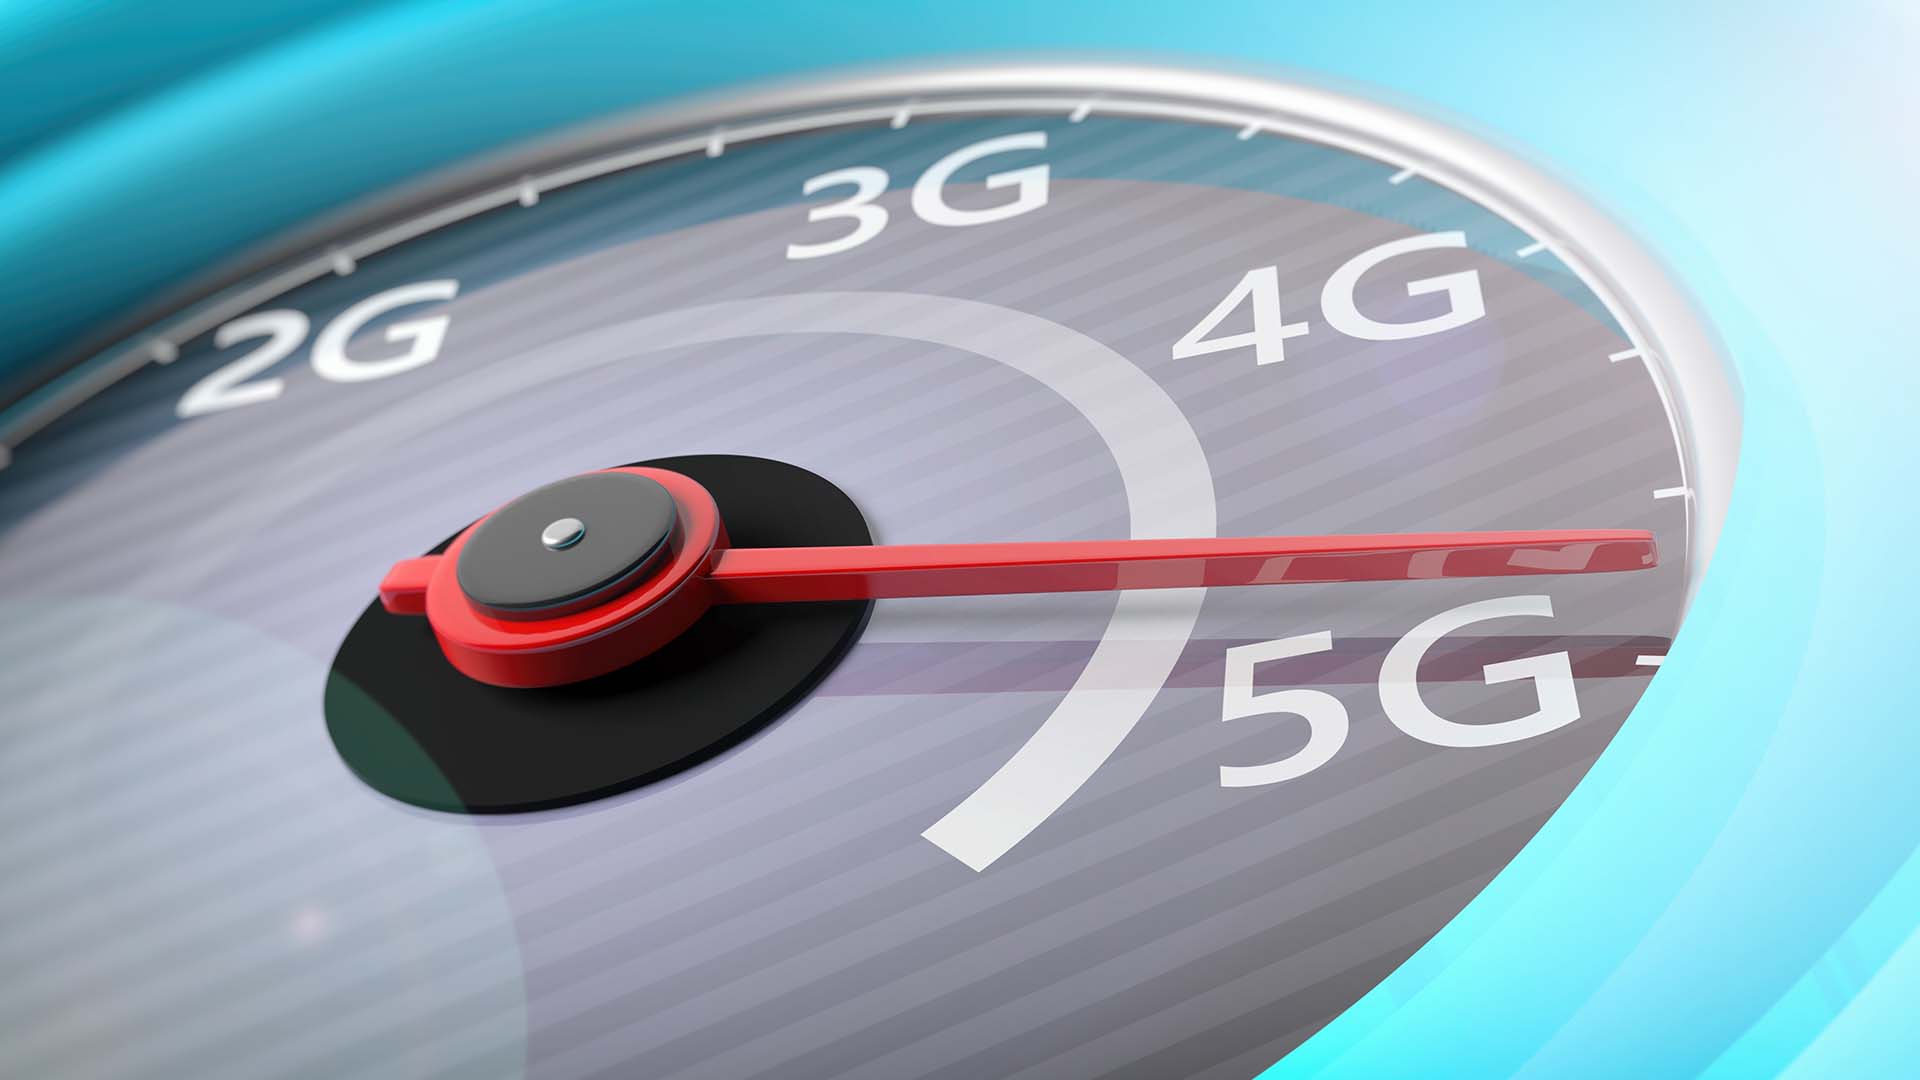 Photo showing the fast speeds of 5G